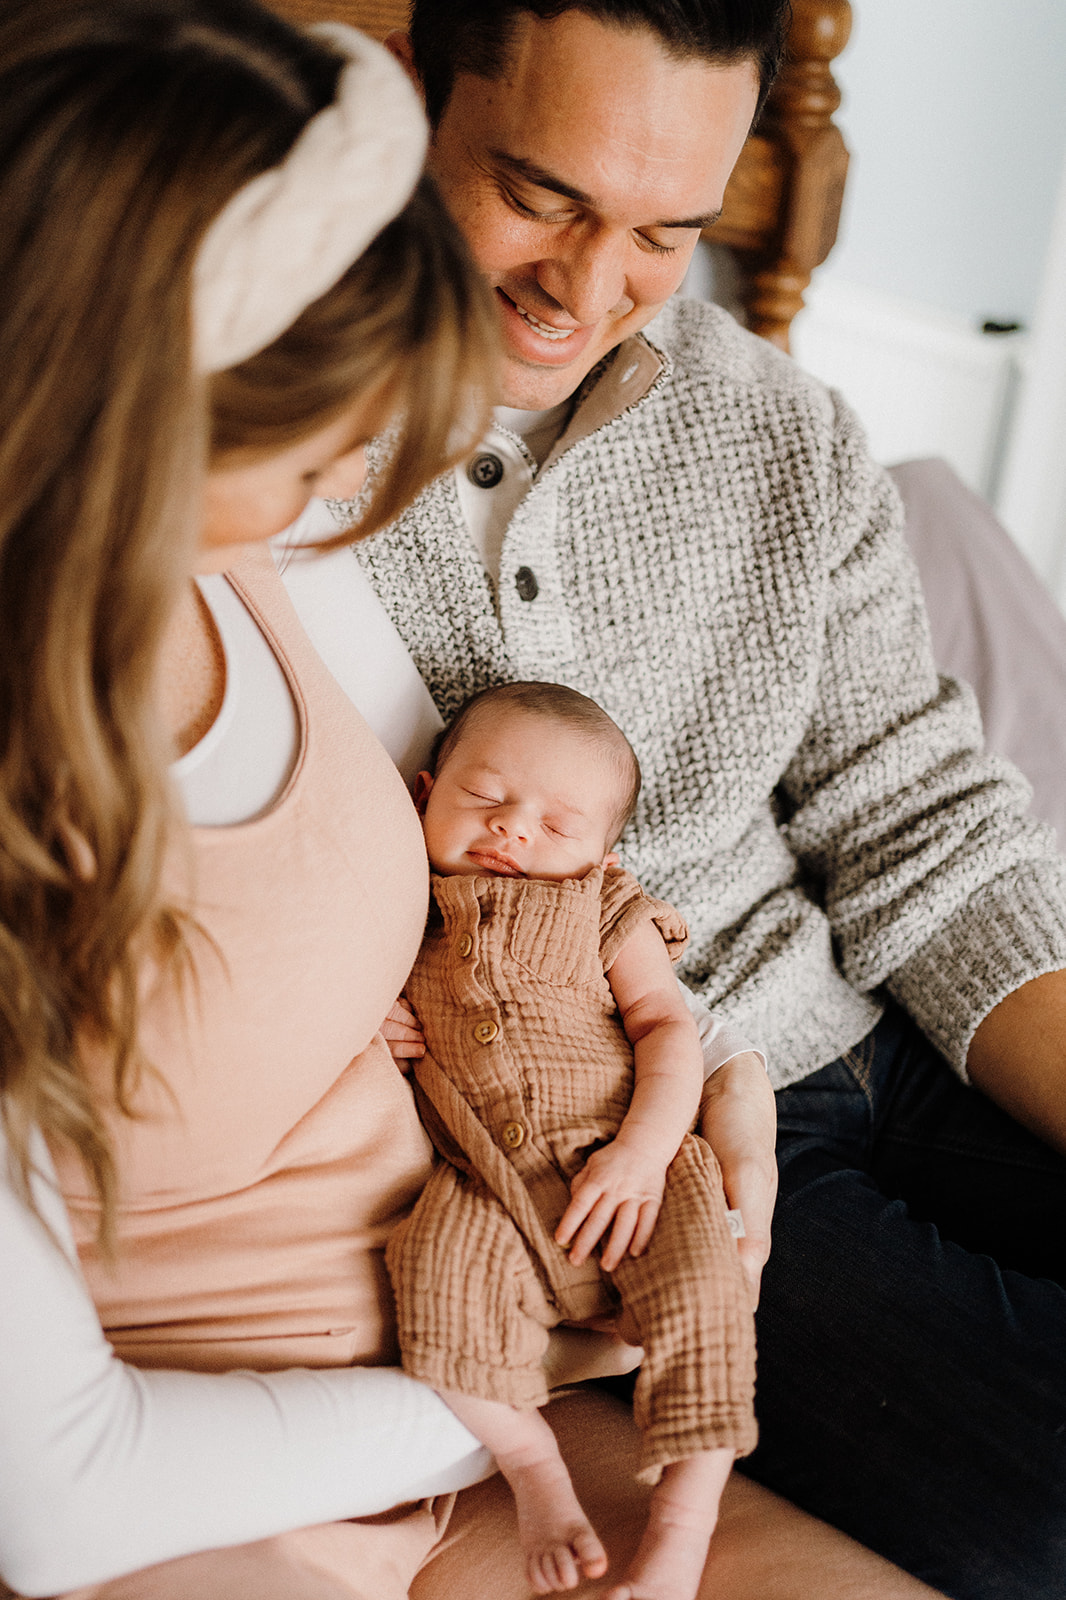 Both parents looking at newborn smiling while mother holds newborn upright between them